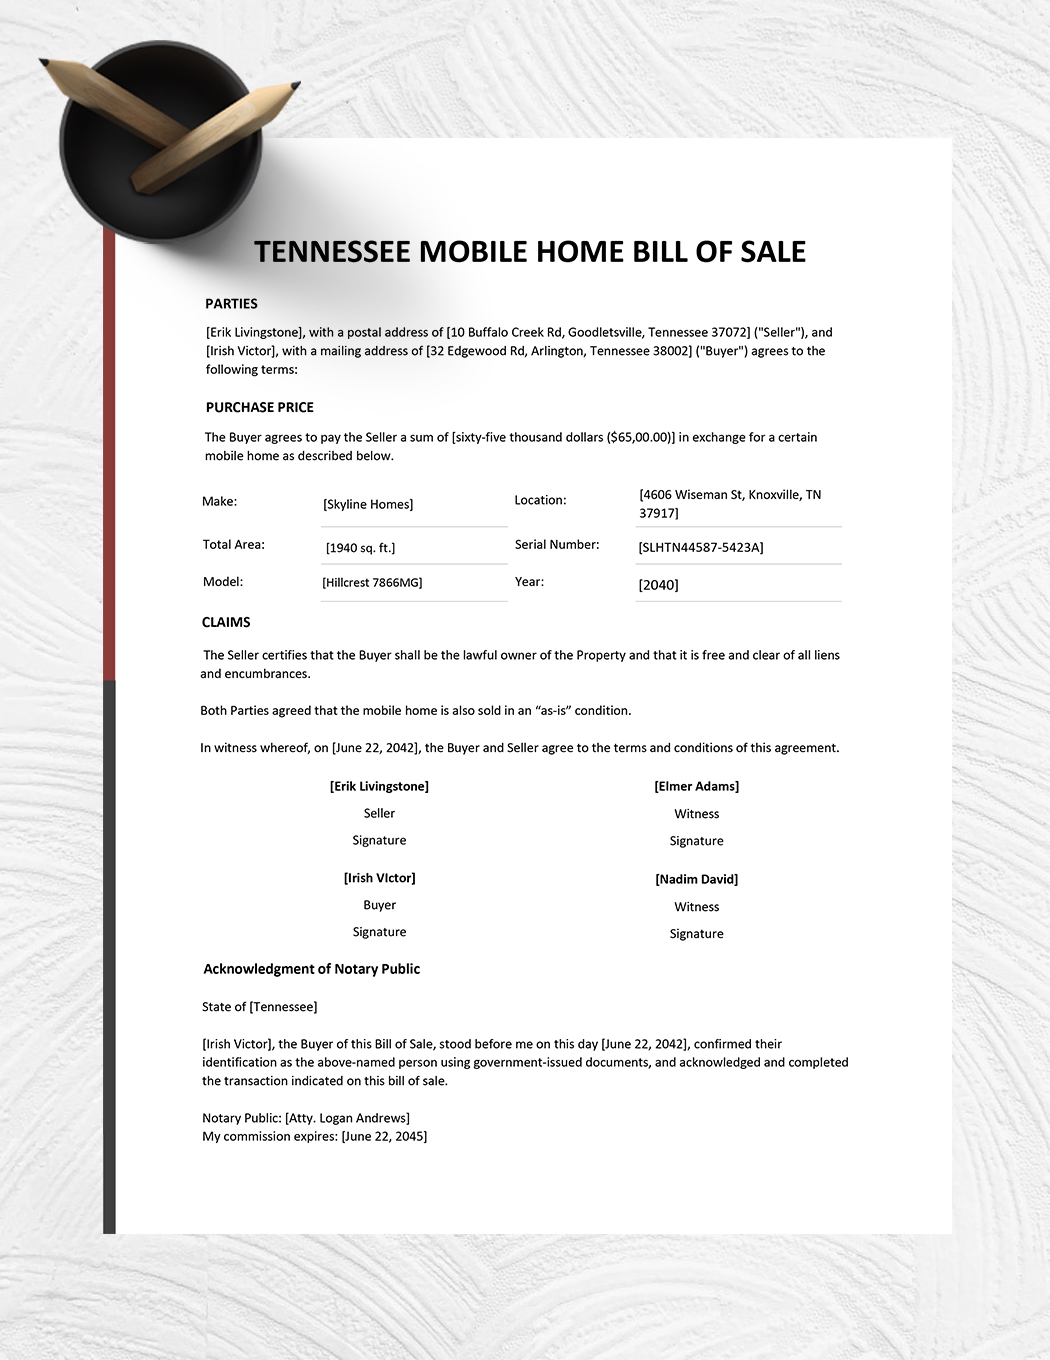 Tennessee Mobile Home Bill of Sale Template